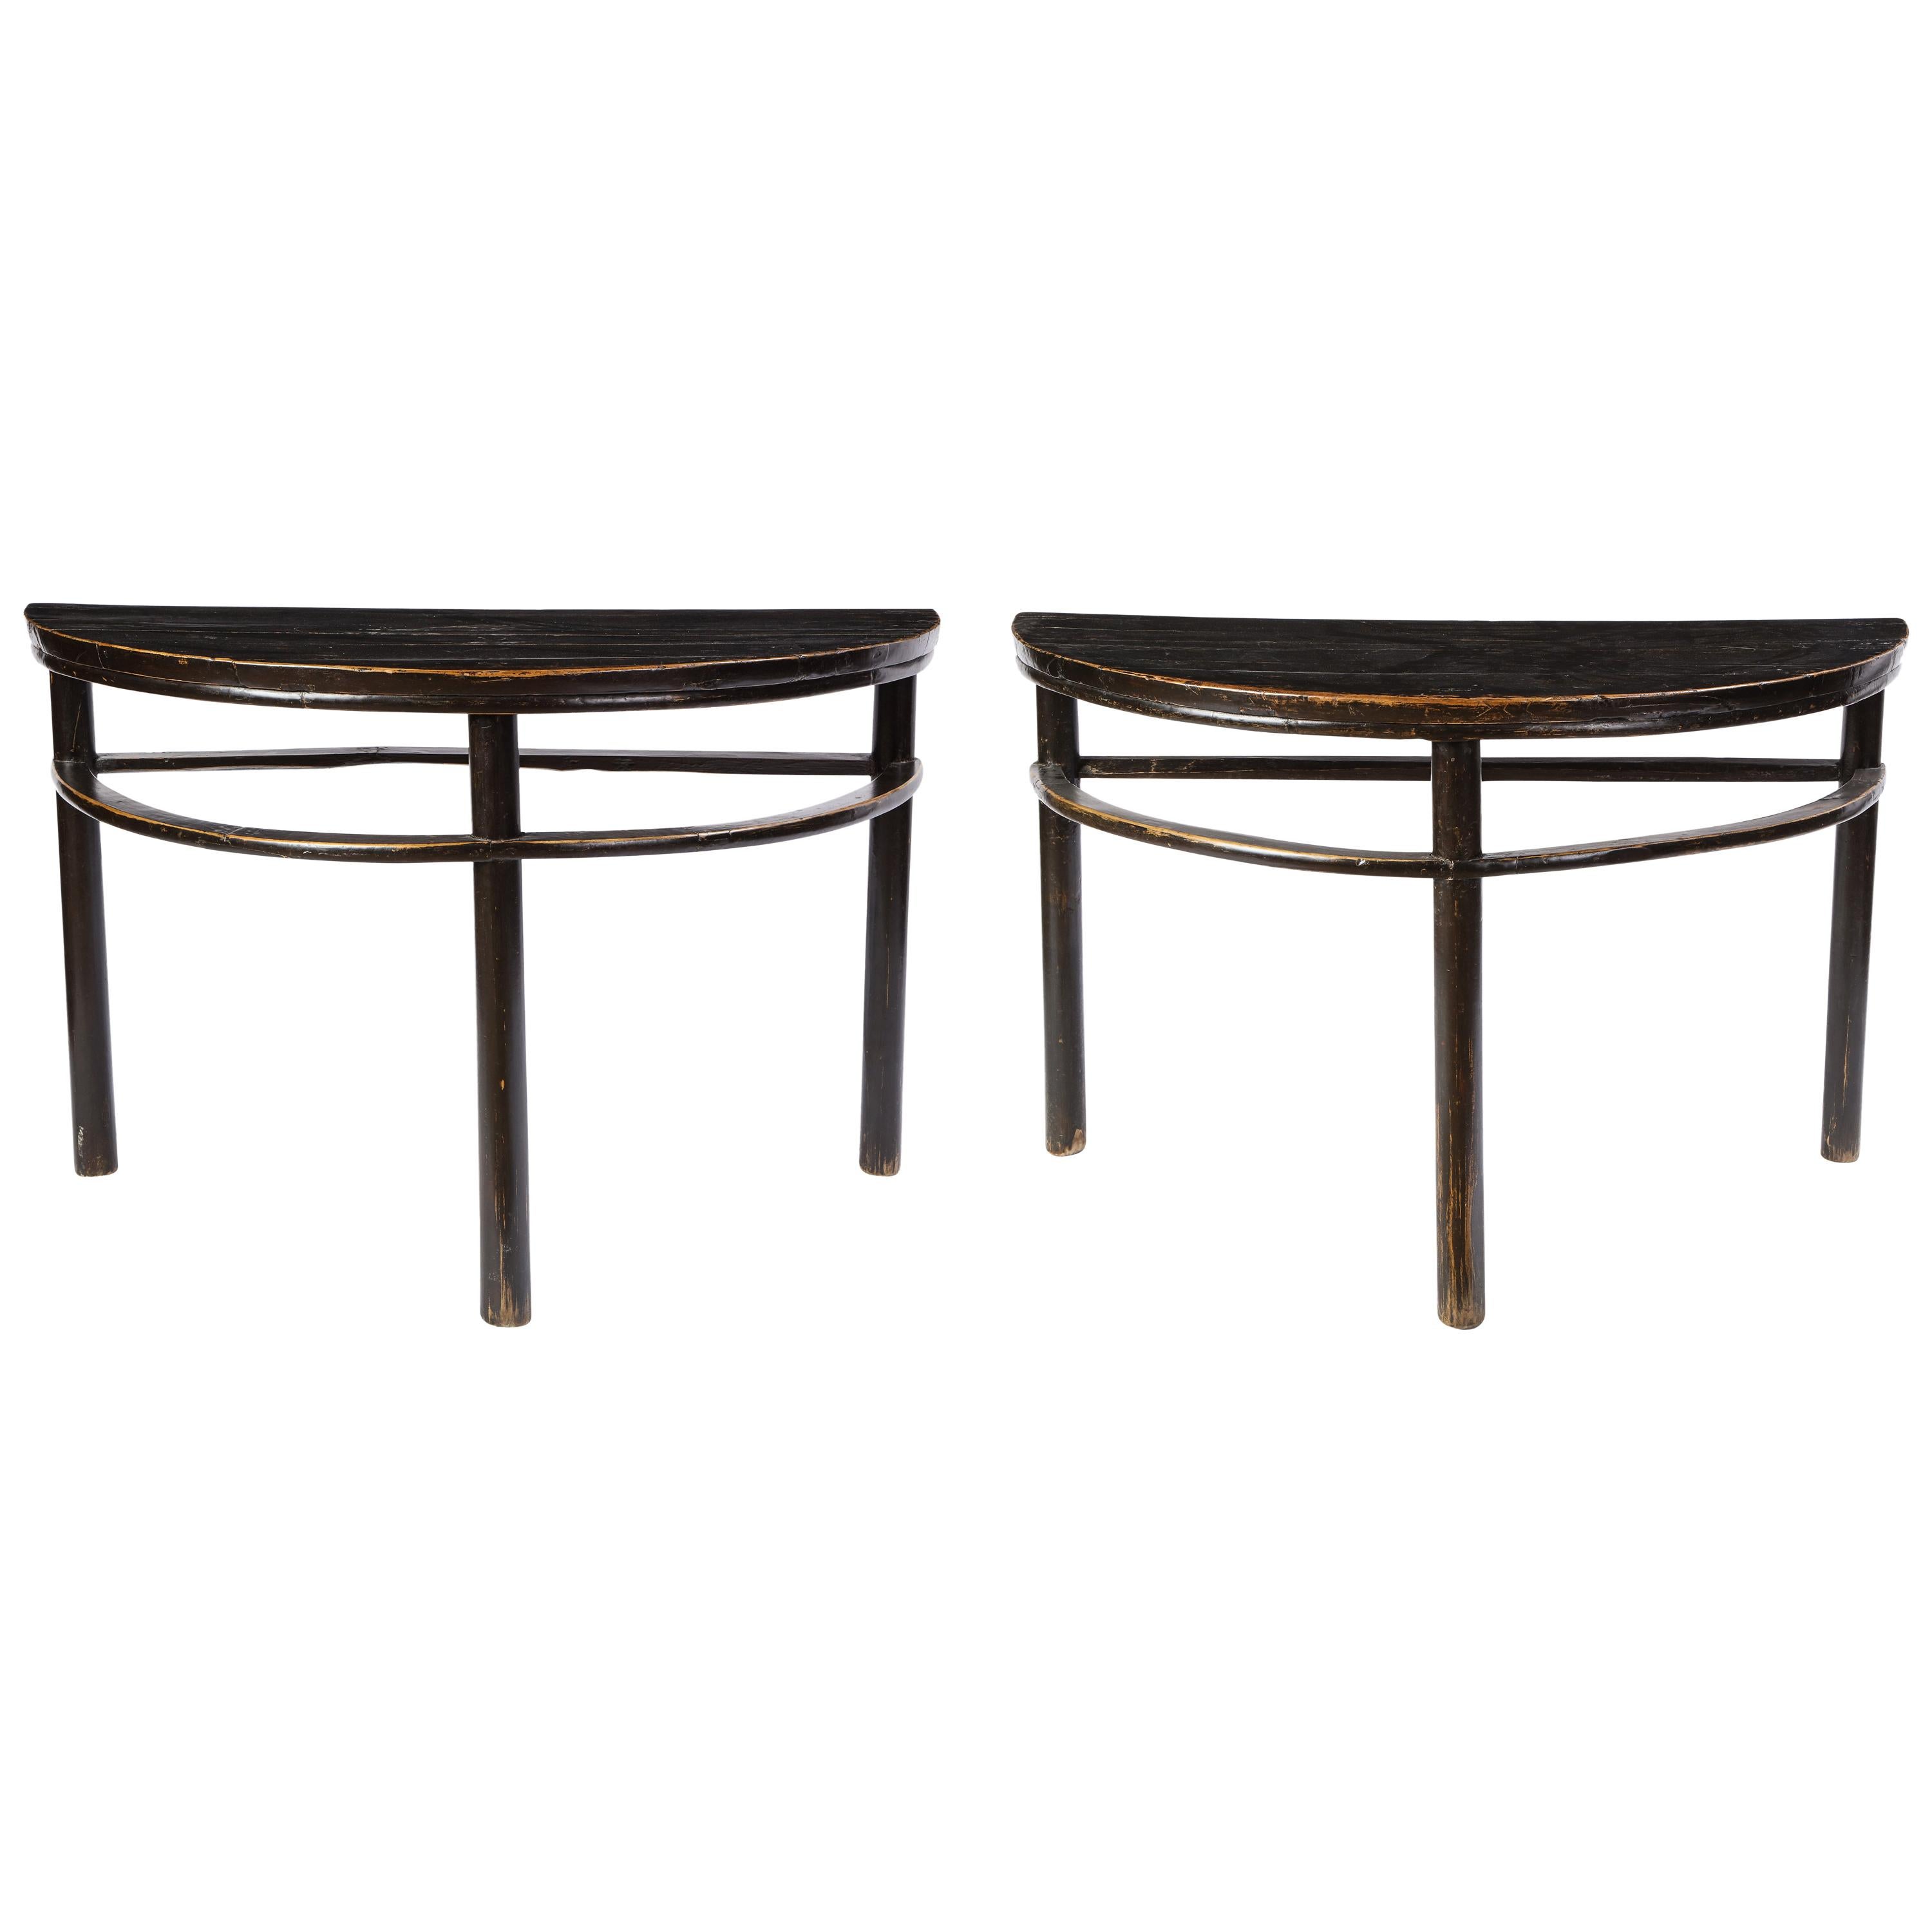 Pair of Chinese Stained Soft Wood Demilune Side Tables, 20th Century